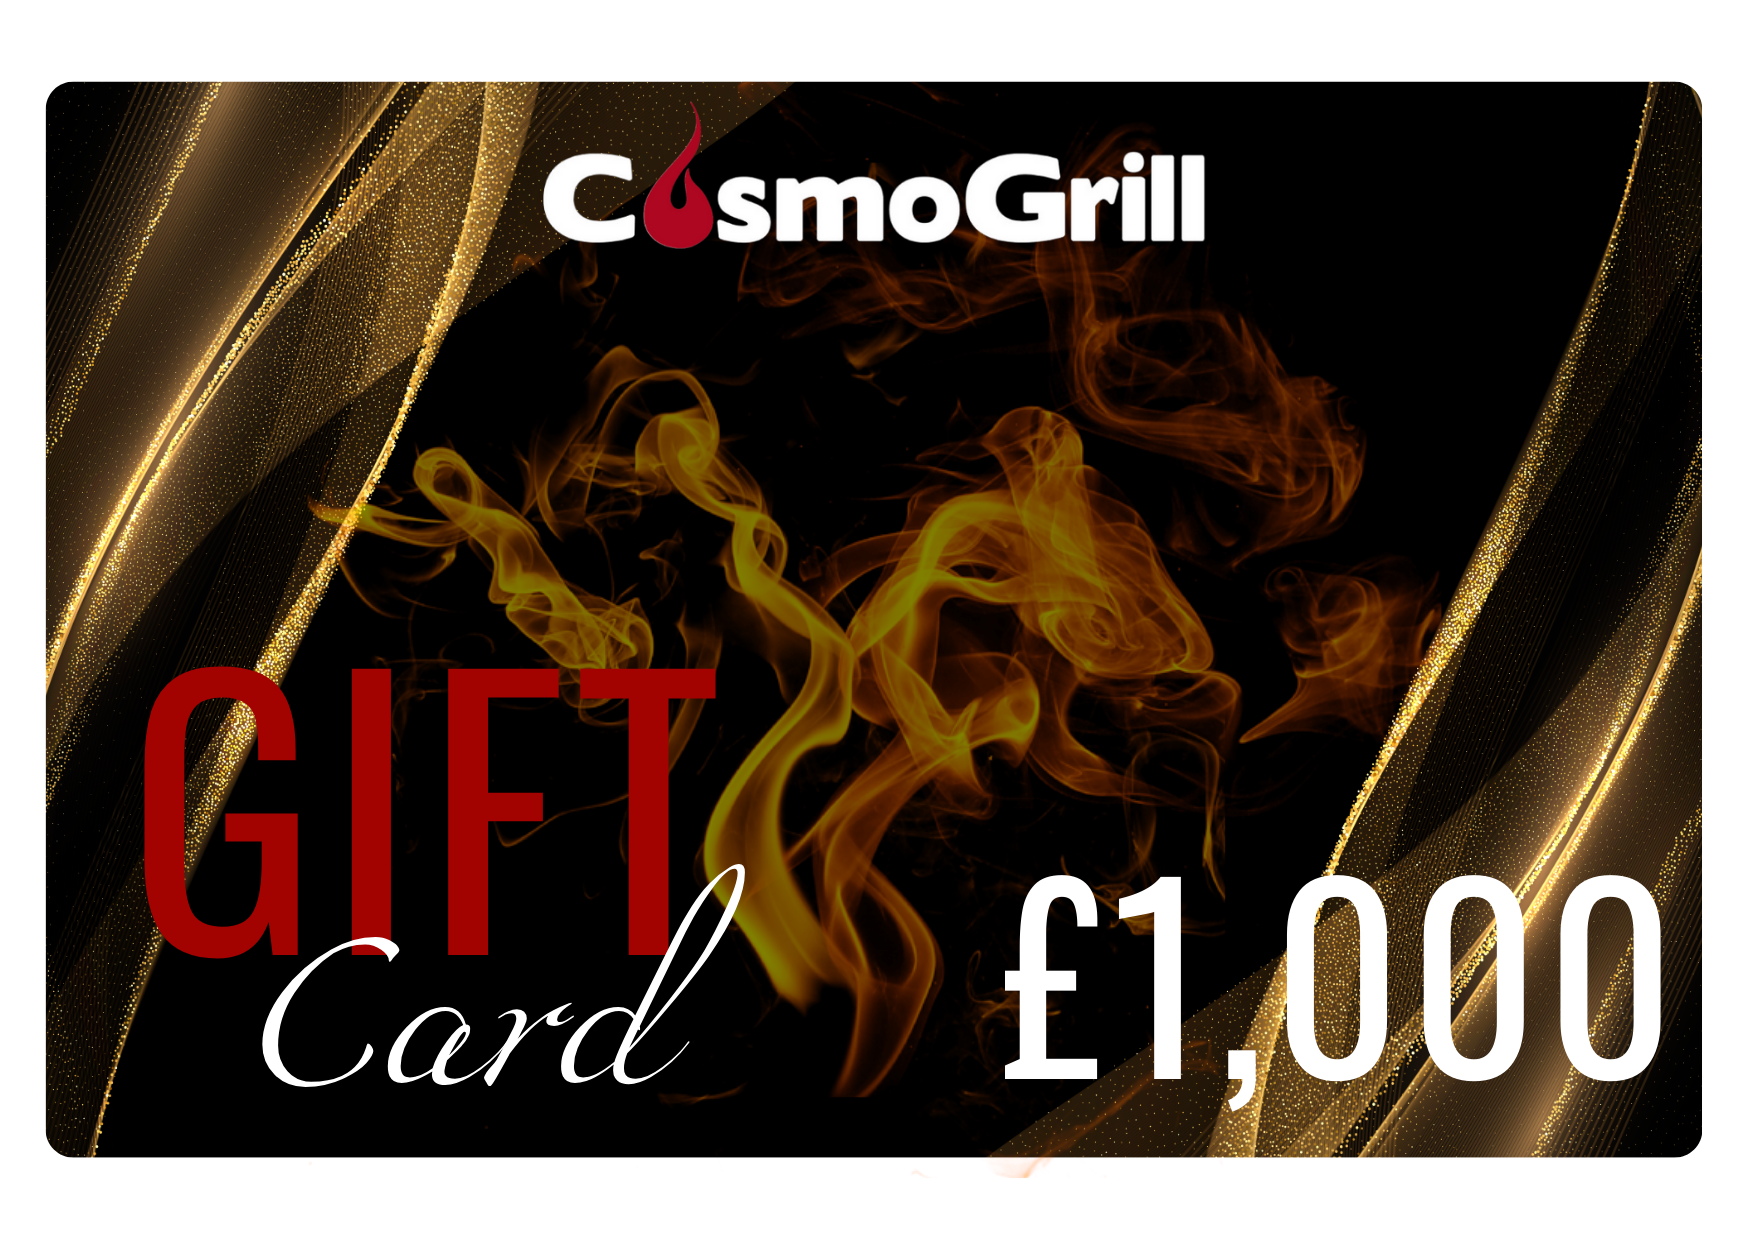 CosmoGrill Gift Card